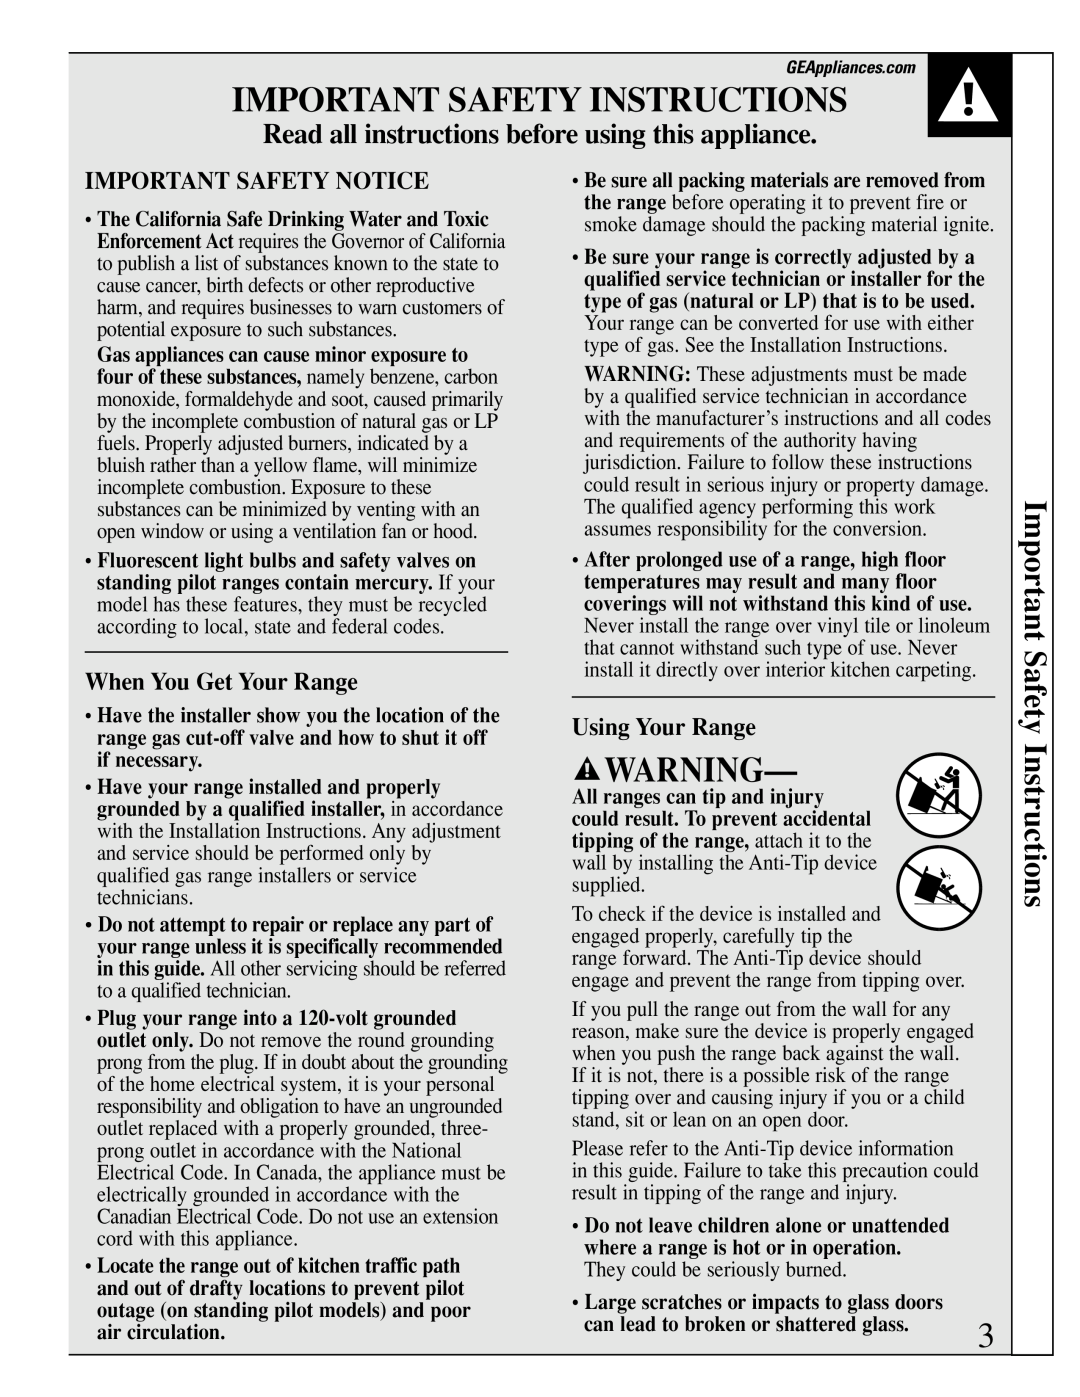 GE XL44 manual Important Safety Instructions, Read all instructions before using this appliance, Important Safety Notice 